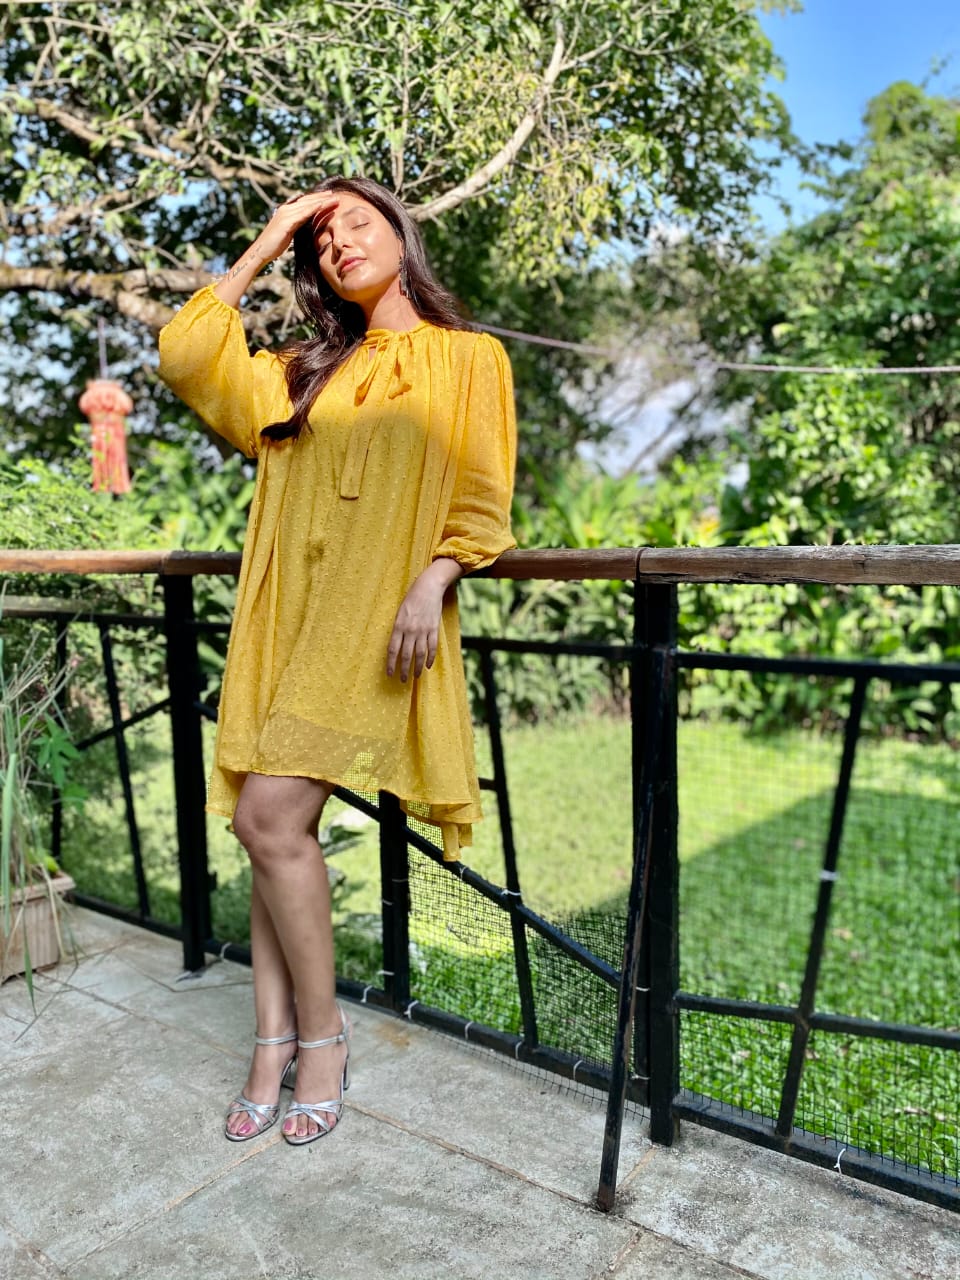  ‘Yellow can be flattering’  - Harshita Gaur kept her look subtle yet stylish. The actress picked out an illuminating, cheerful yellow dress which was practical and rock solid but warming and optimistic at the same time.